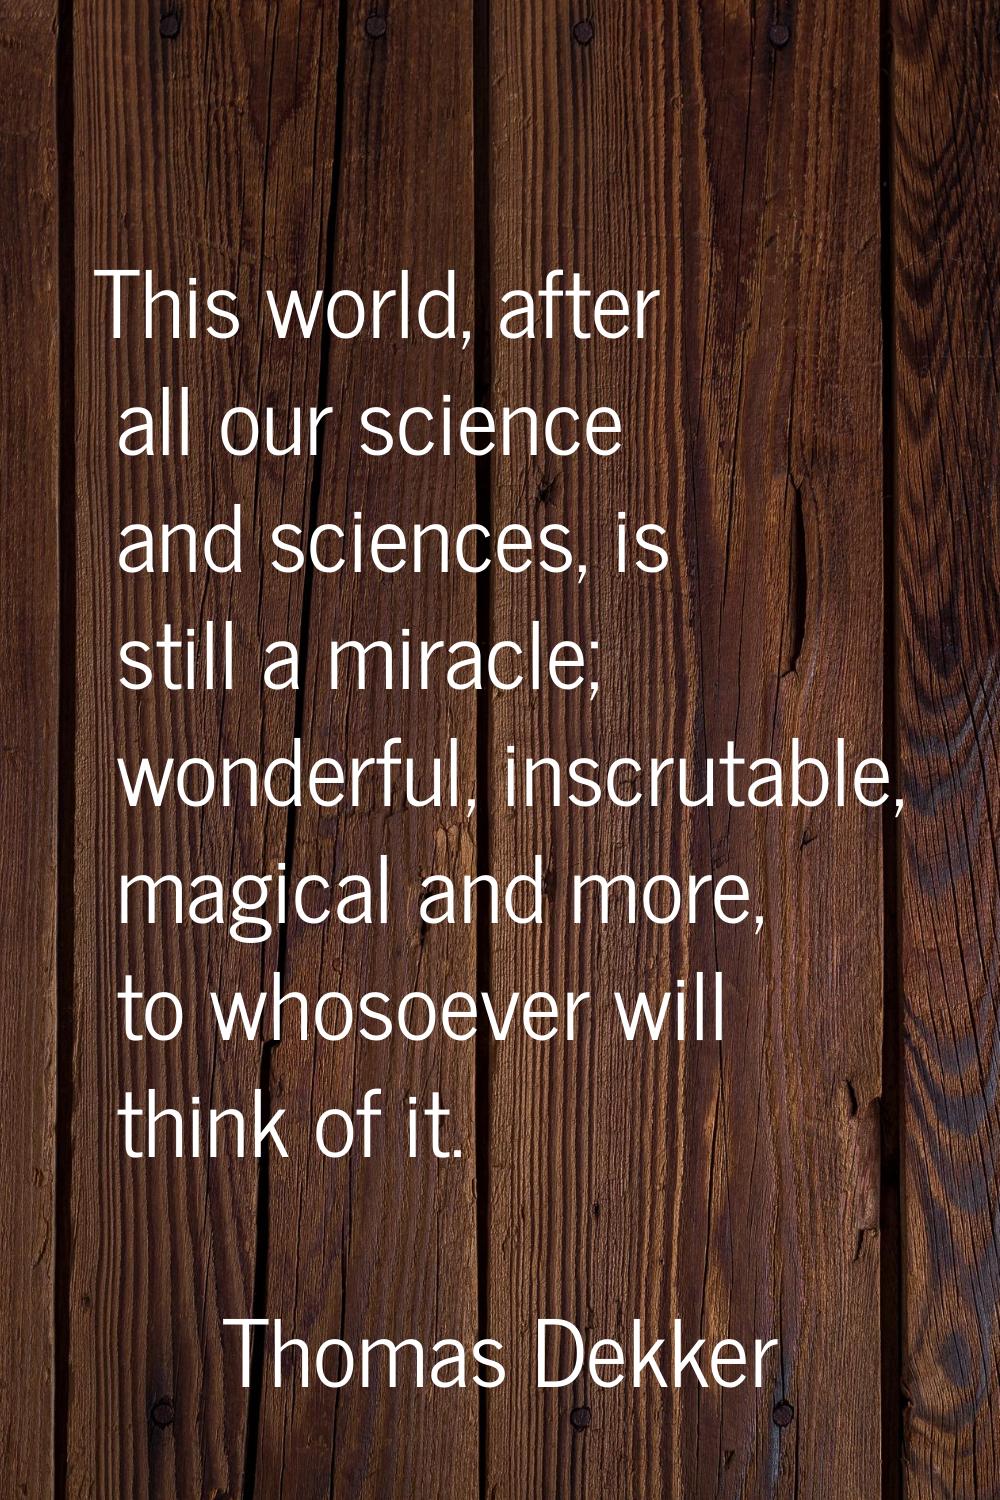 This world, after all our science and sciences, is still a miracle; wonderful, inscrutable, magical